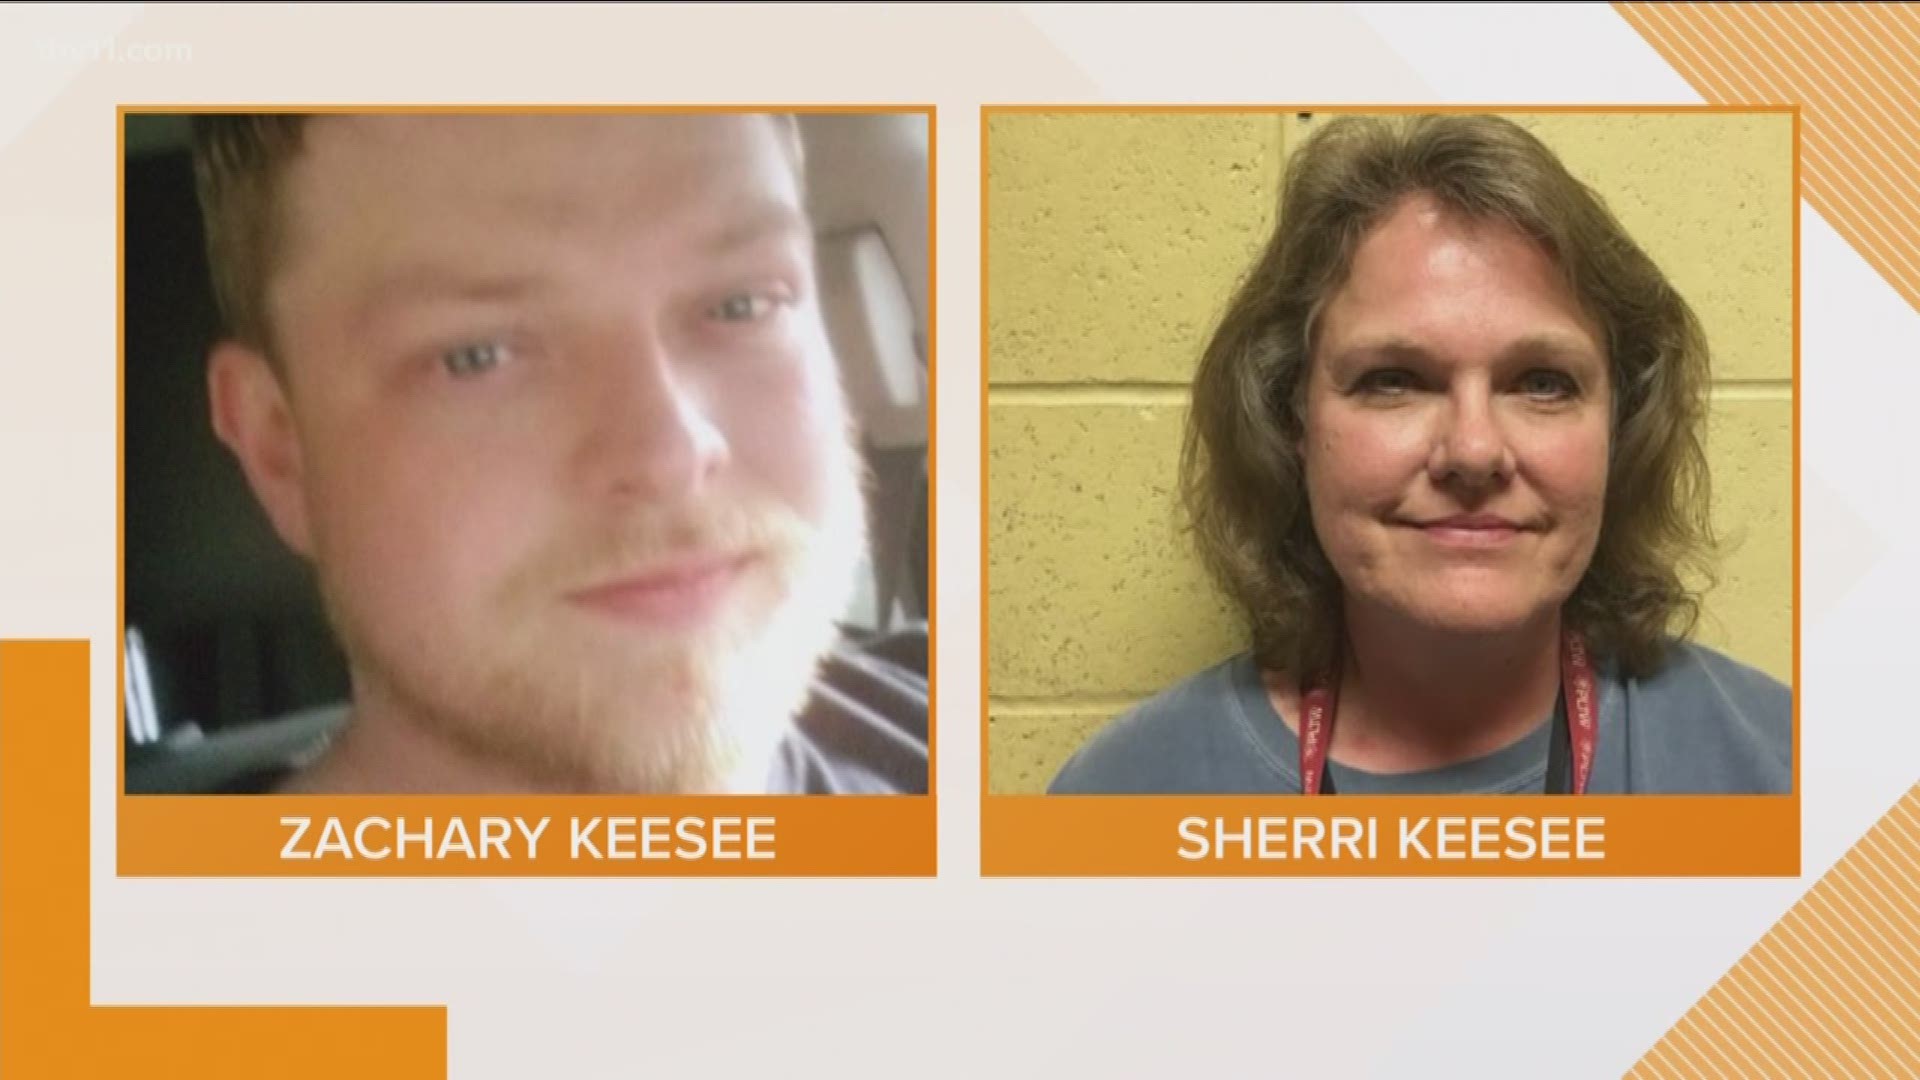 Fifty-year-old Sherri Keesee of Maumelle faces a charge of hindering the apprehension of her son, 24-year-old Zachary Keesee, who is a capital murder suspect in this case